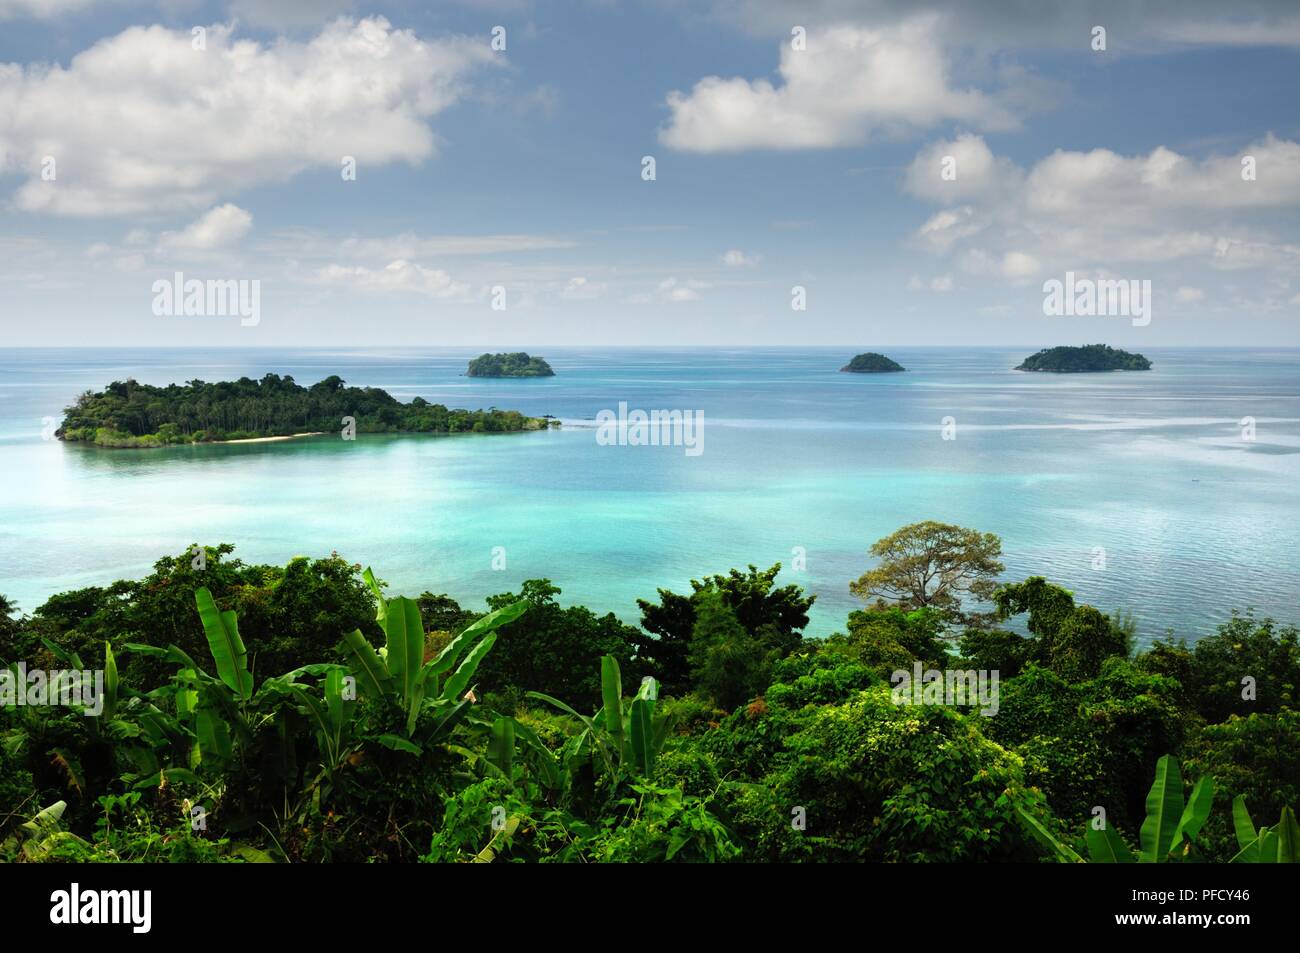 Group of islands near Koh Chang Island, Thailand. Stock Photo